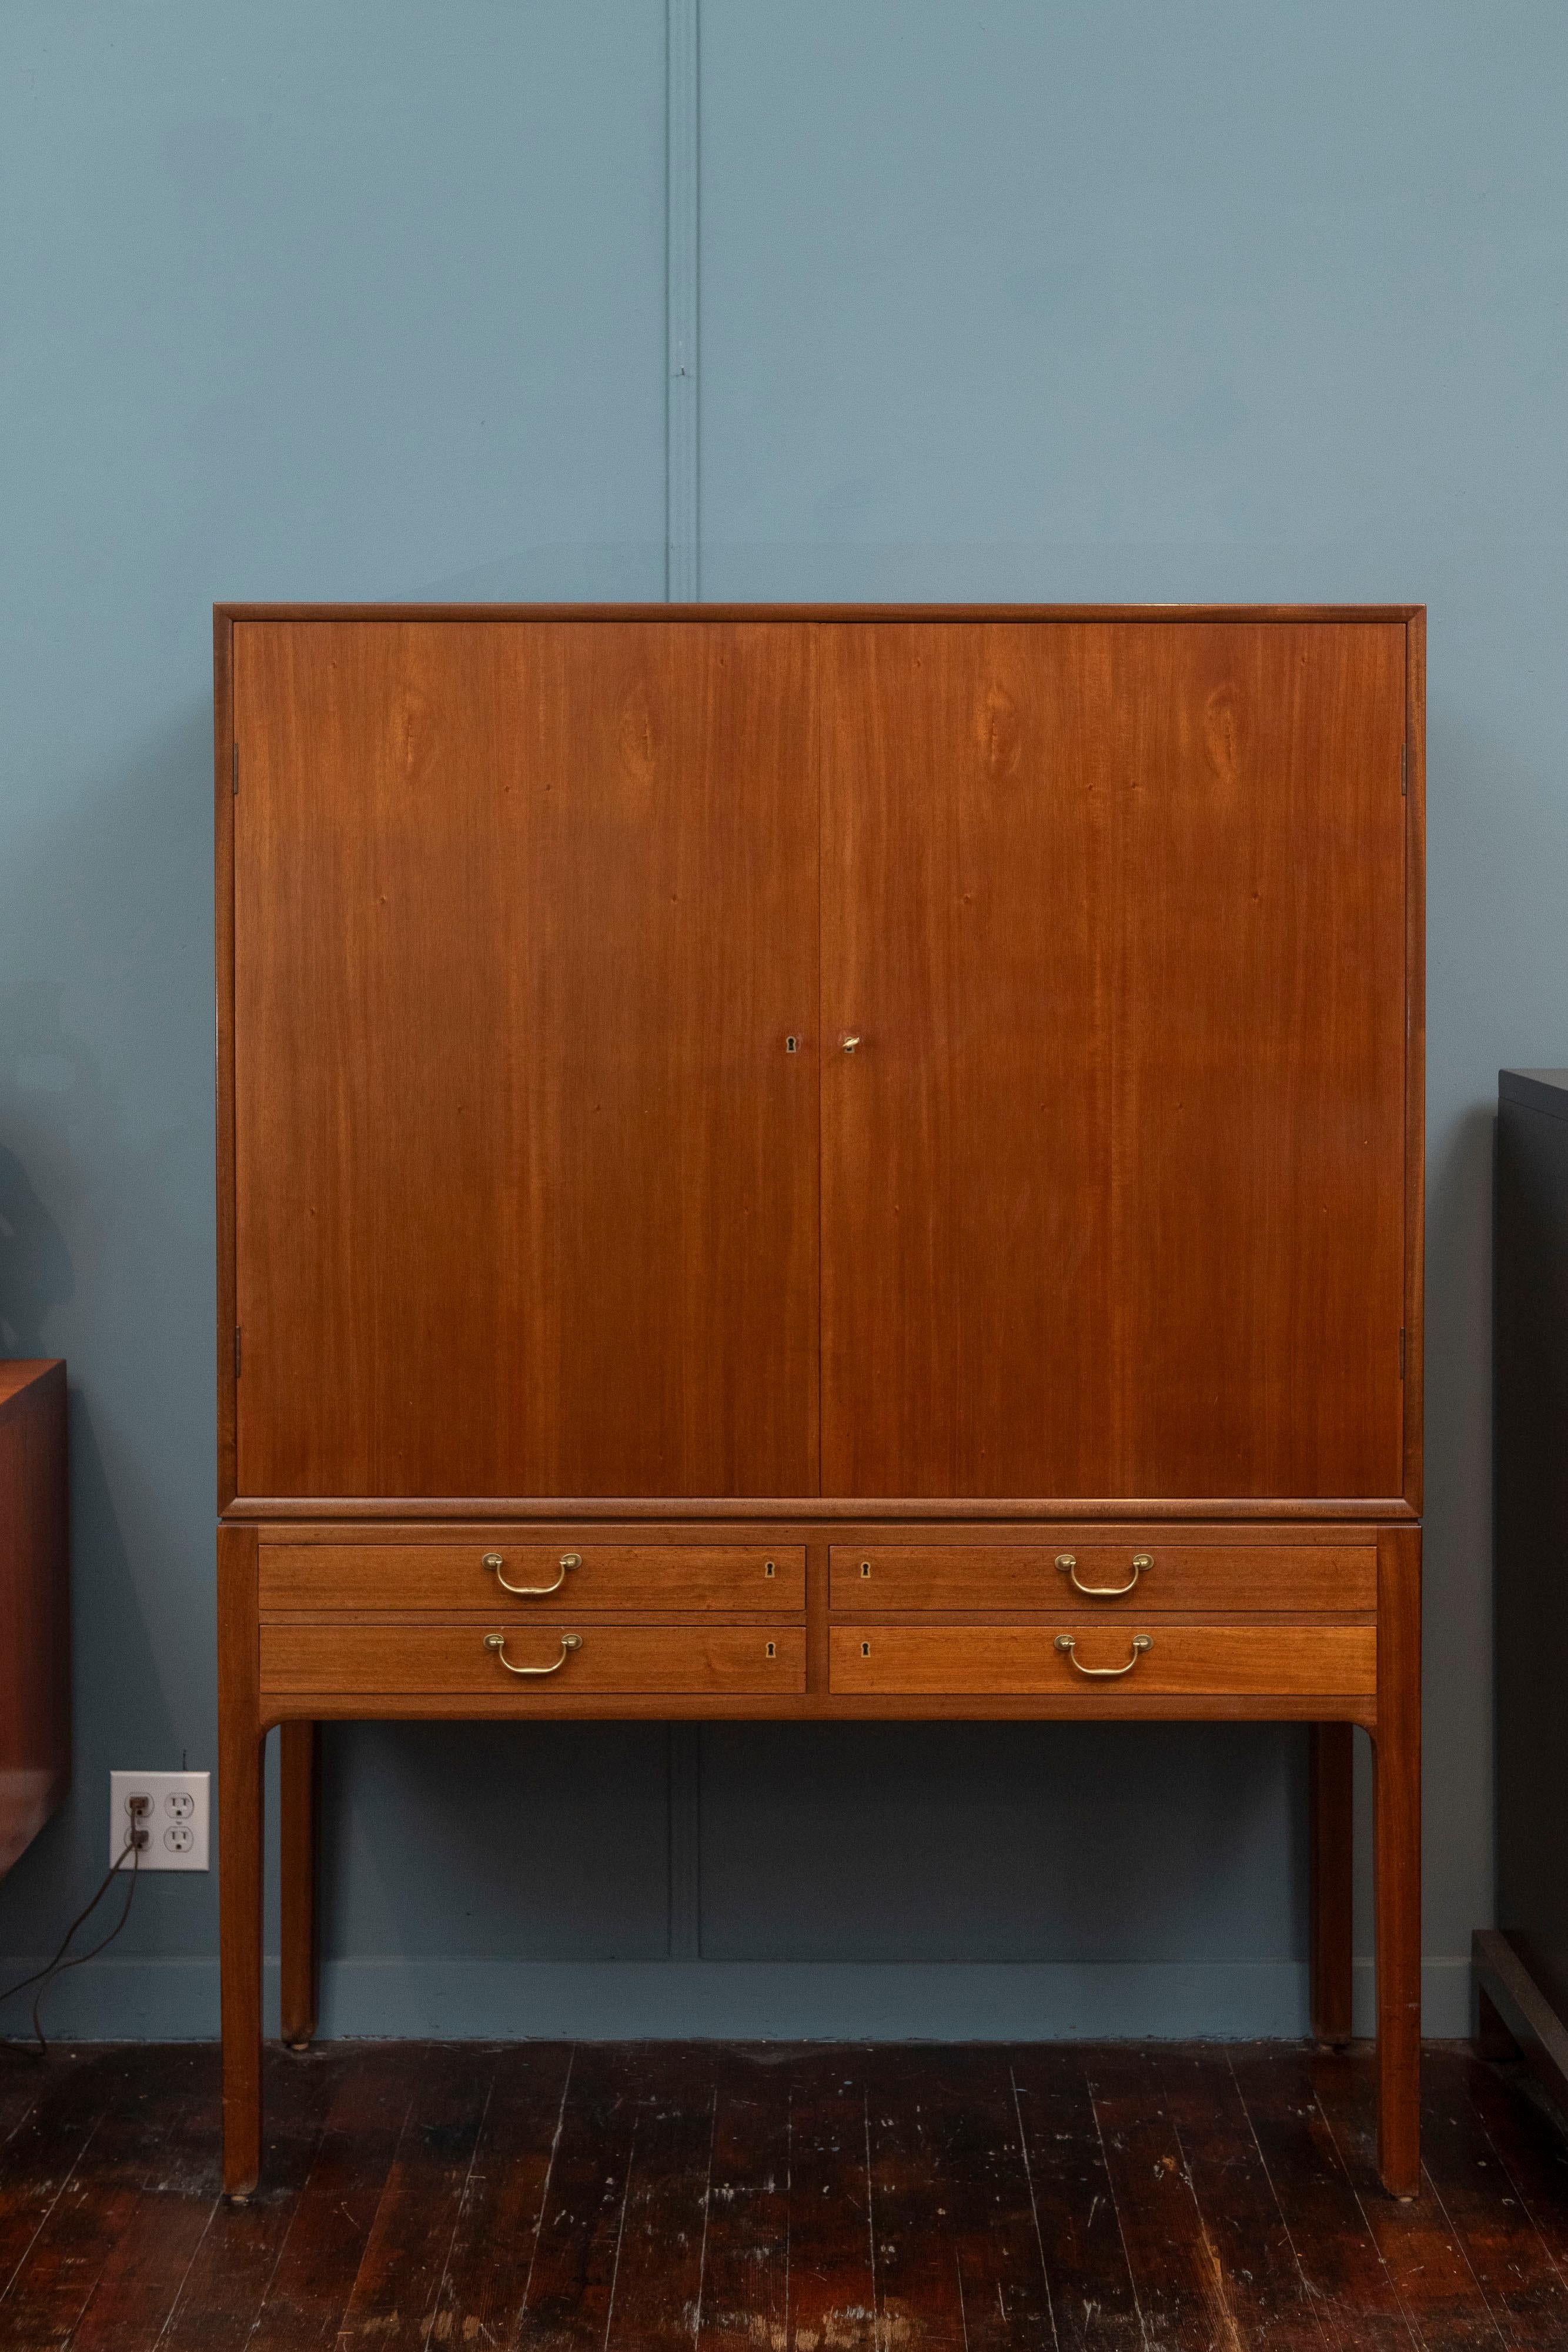 Ole Wanscher design tall cabinet for A.J. Iversen, Denmark. High quality construction and material executed in a refined Scandinavian aesthetic. mahogany case with brass drawer pulls and locking key. Two upper doors reveal six matching adjustable